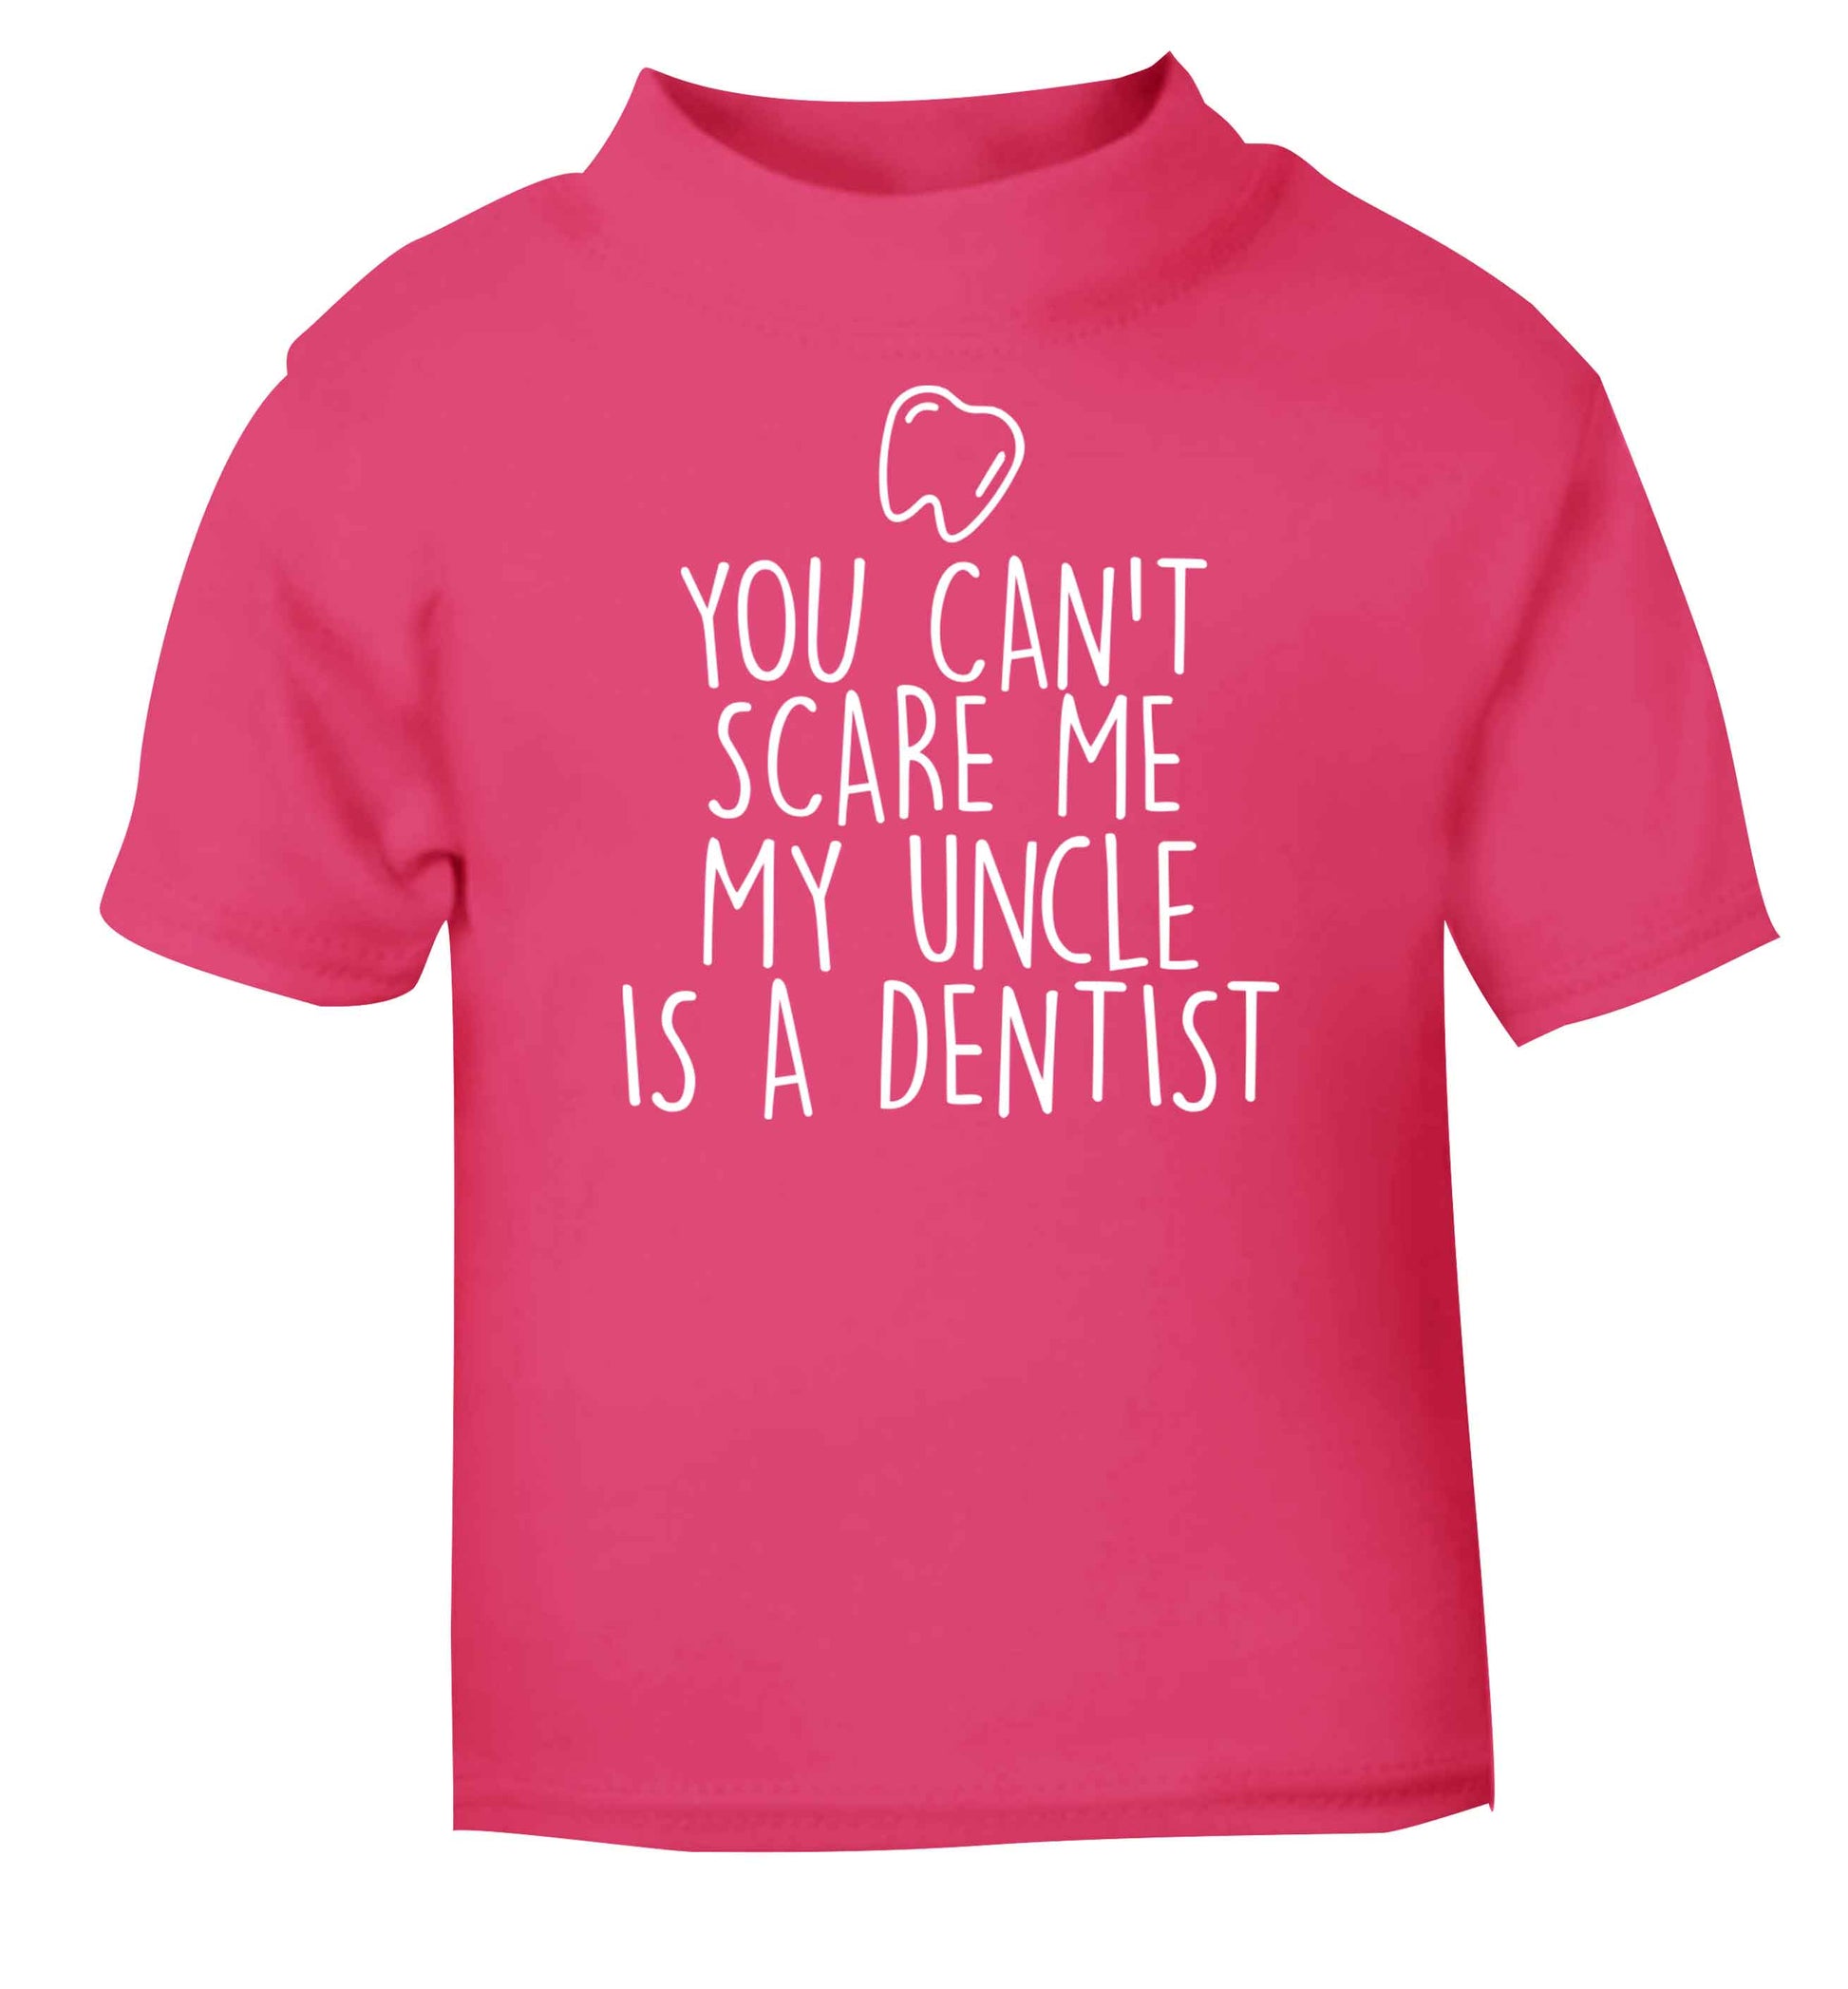 You can't scare me my uncle is a dentist pink baby toddler Tshirt 2 Years